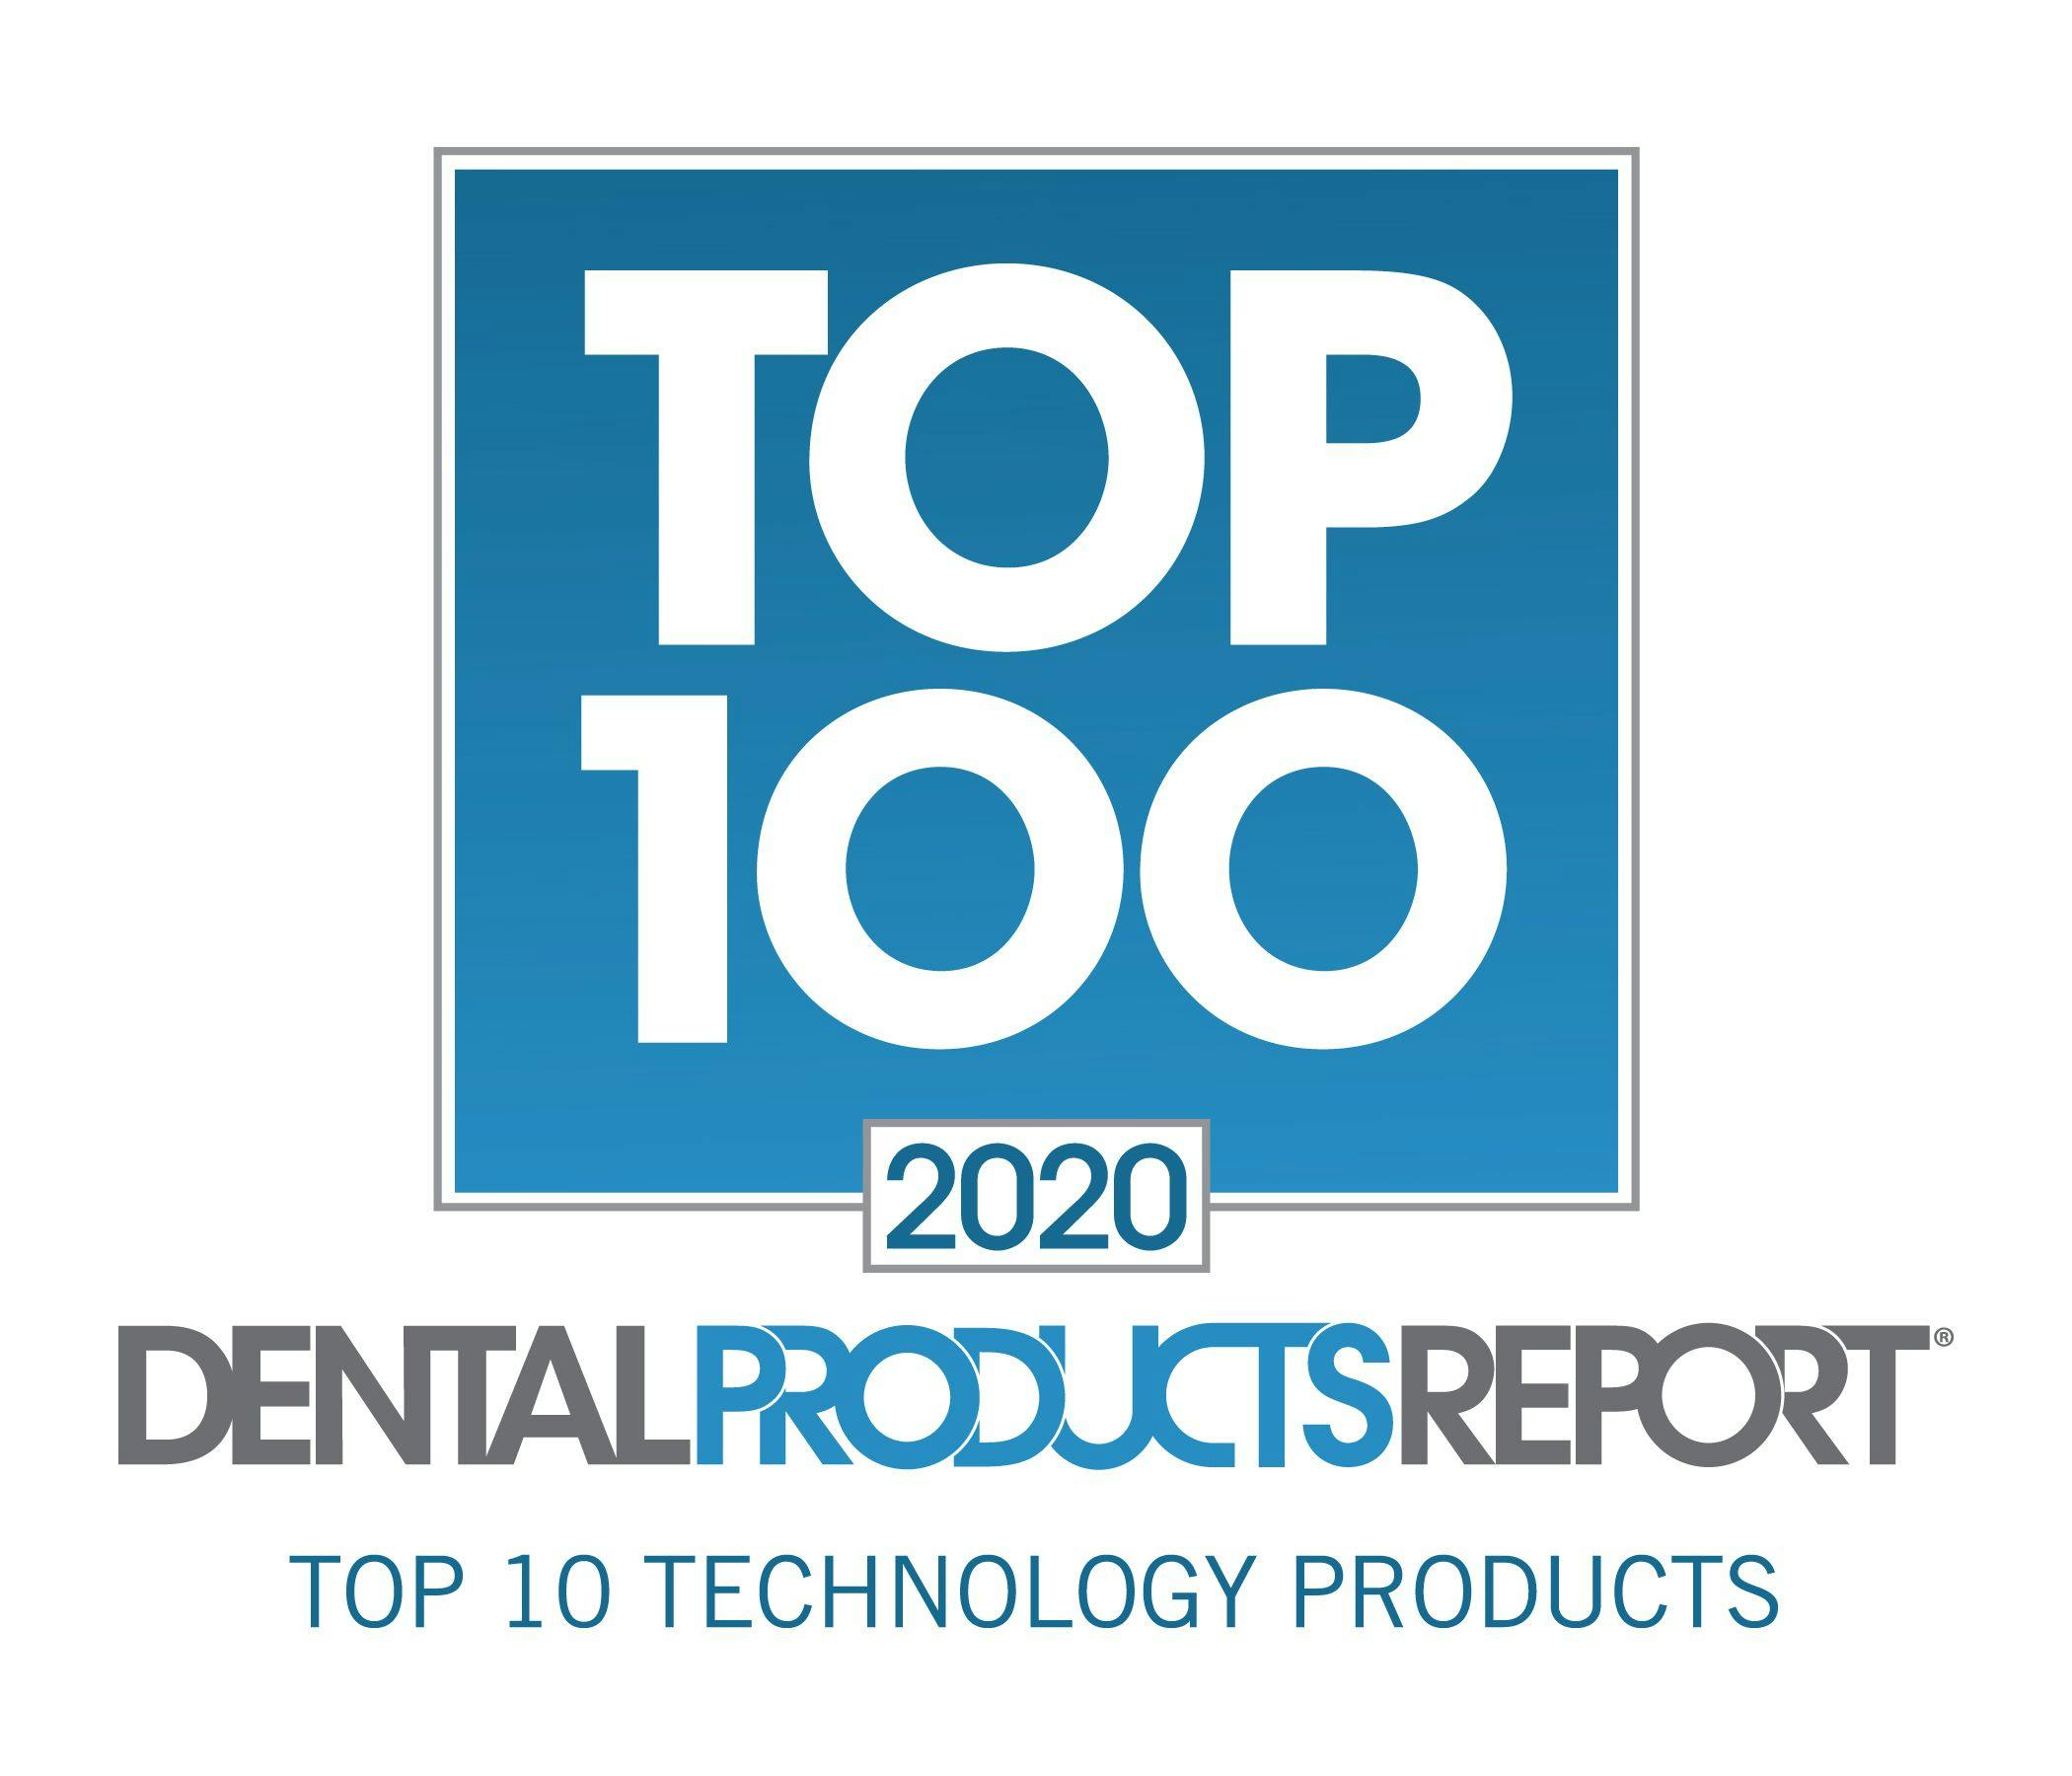 Top 10 Technology Products of 2020